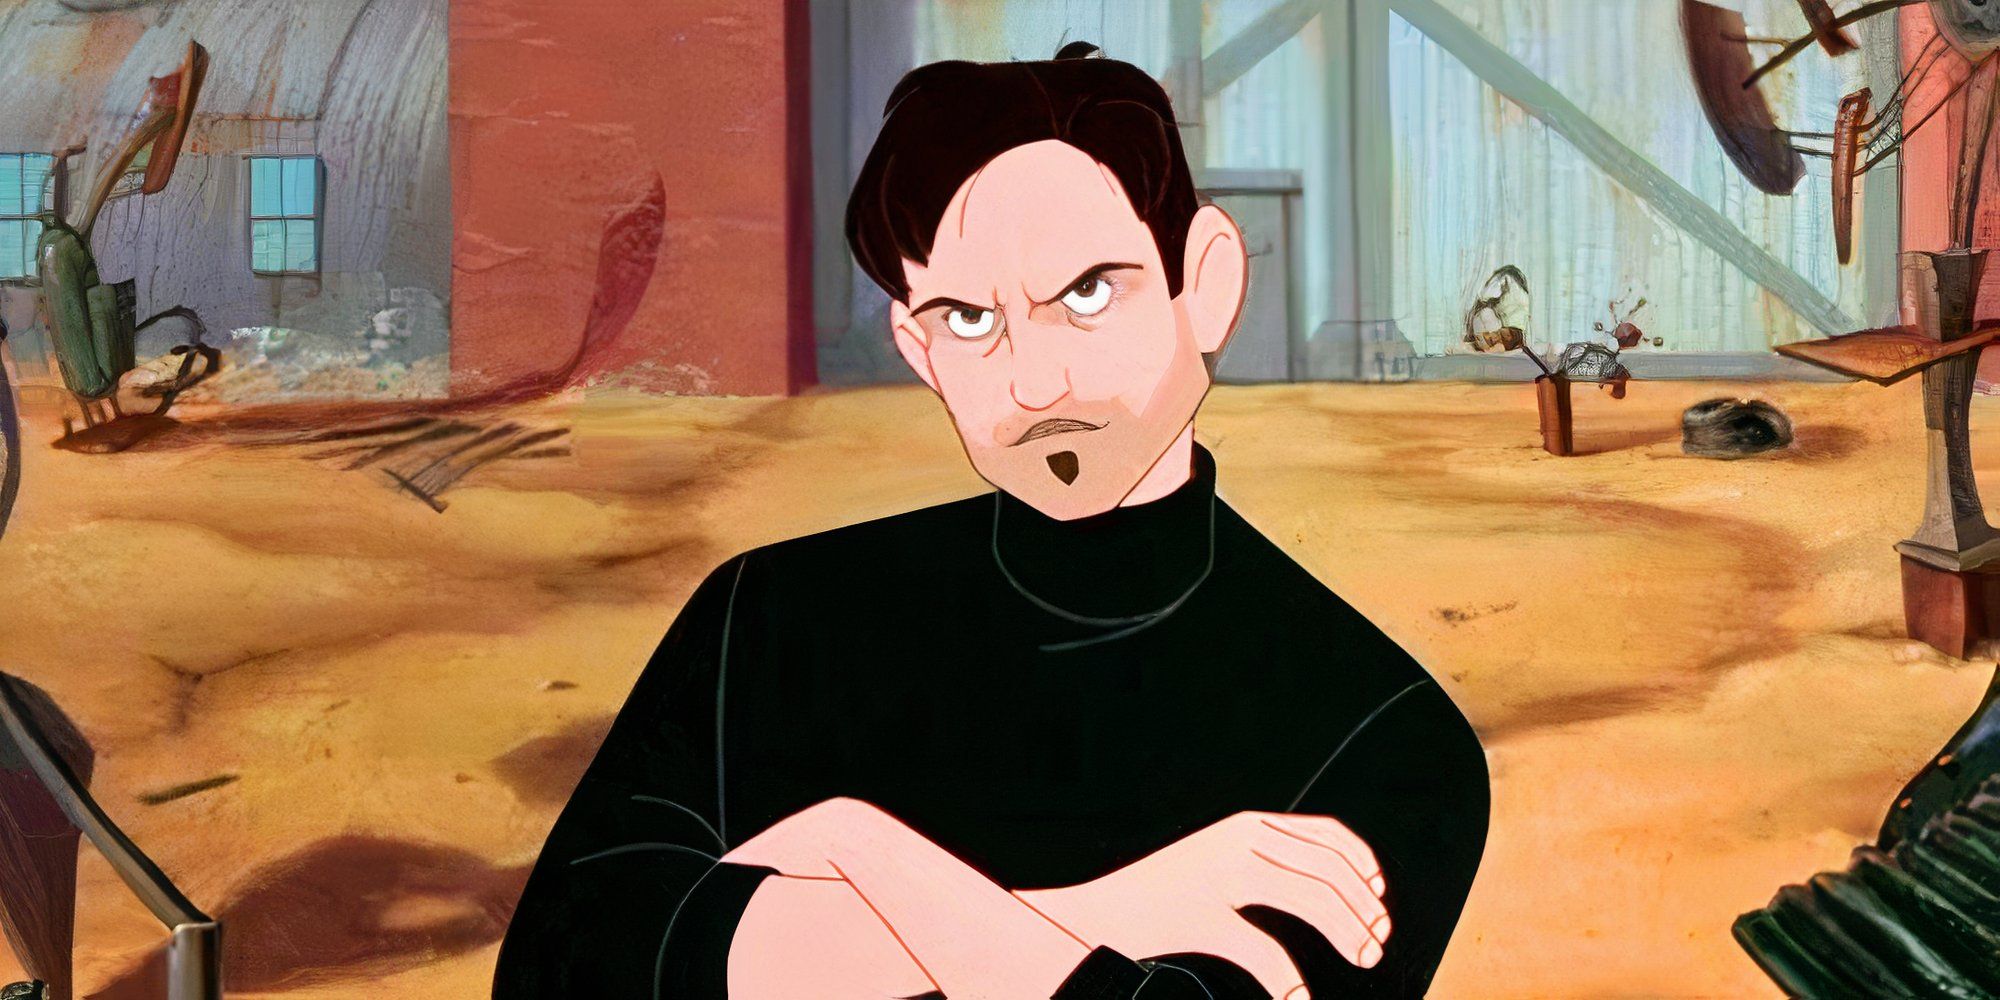 Harry Connick Jr. in The Iron Giant (1999)